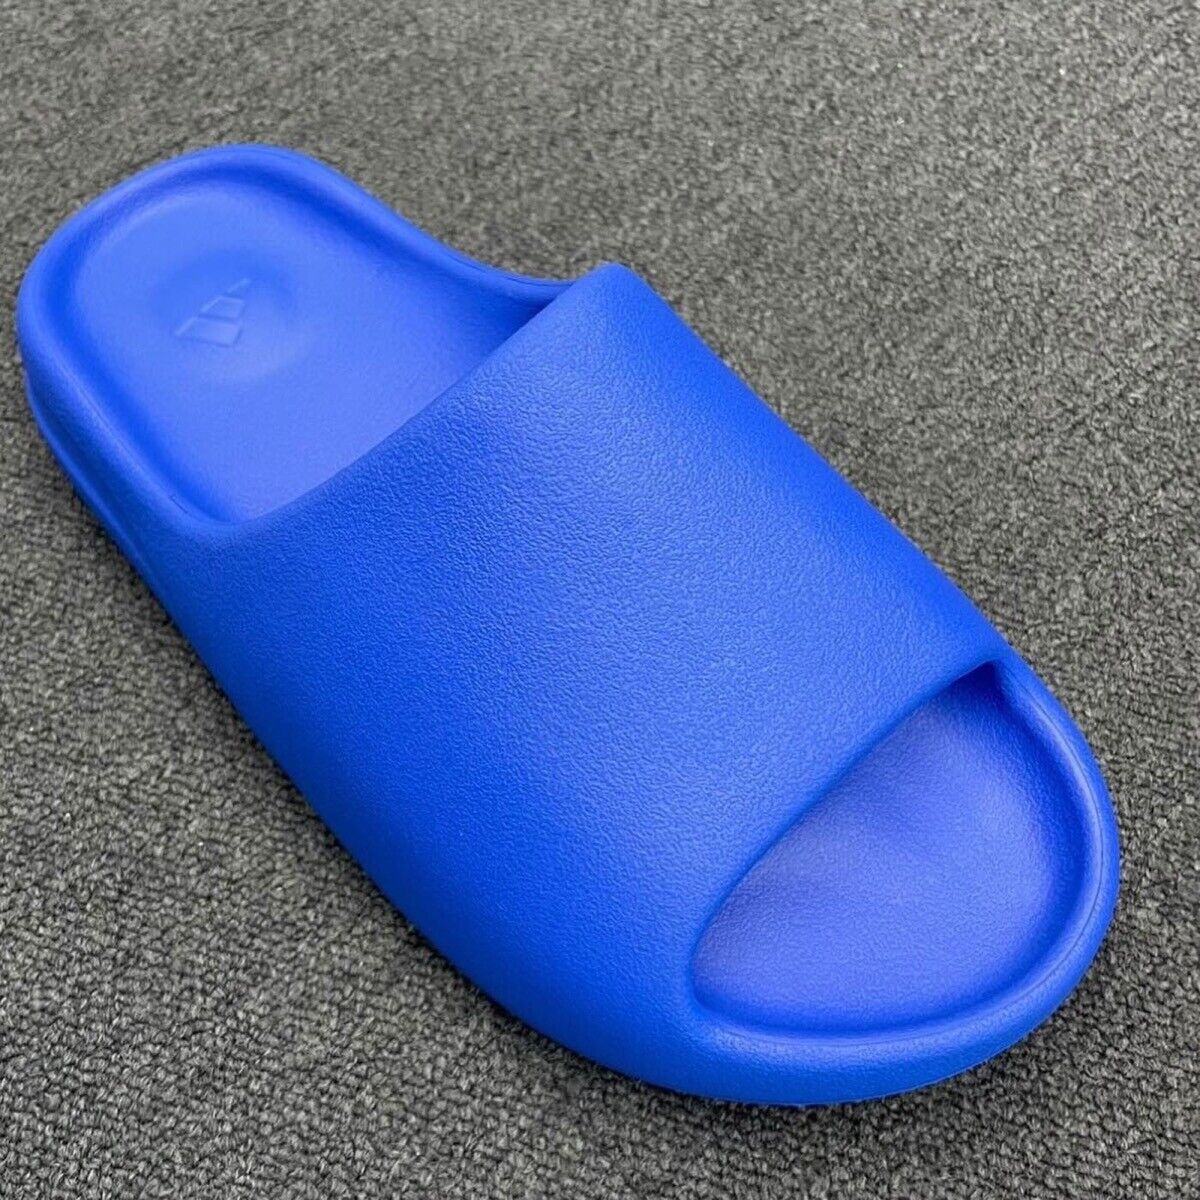 Adidas Yeezy Slide Azure ID4133 Blue US5-US13 With Box Release 